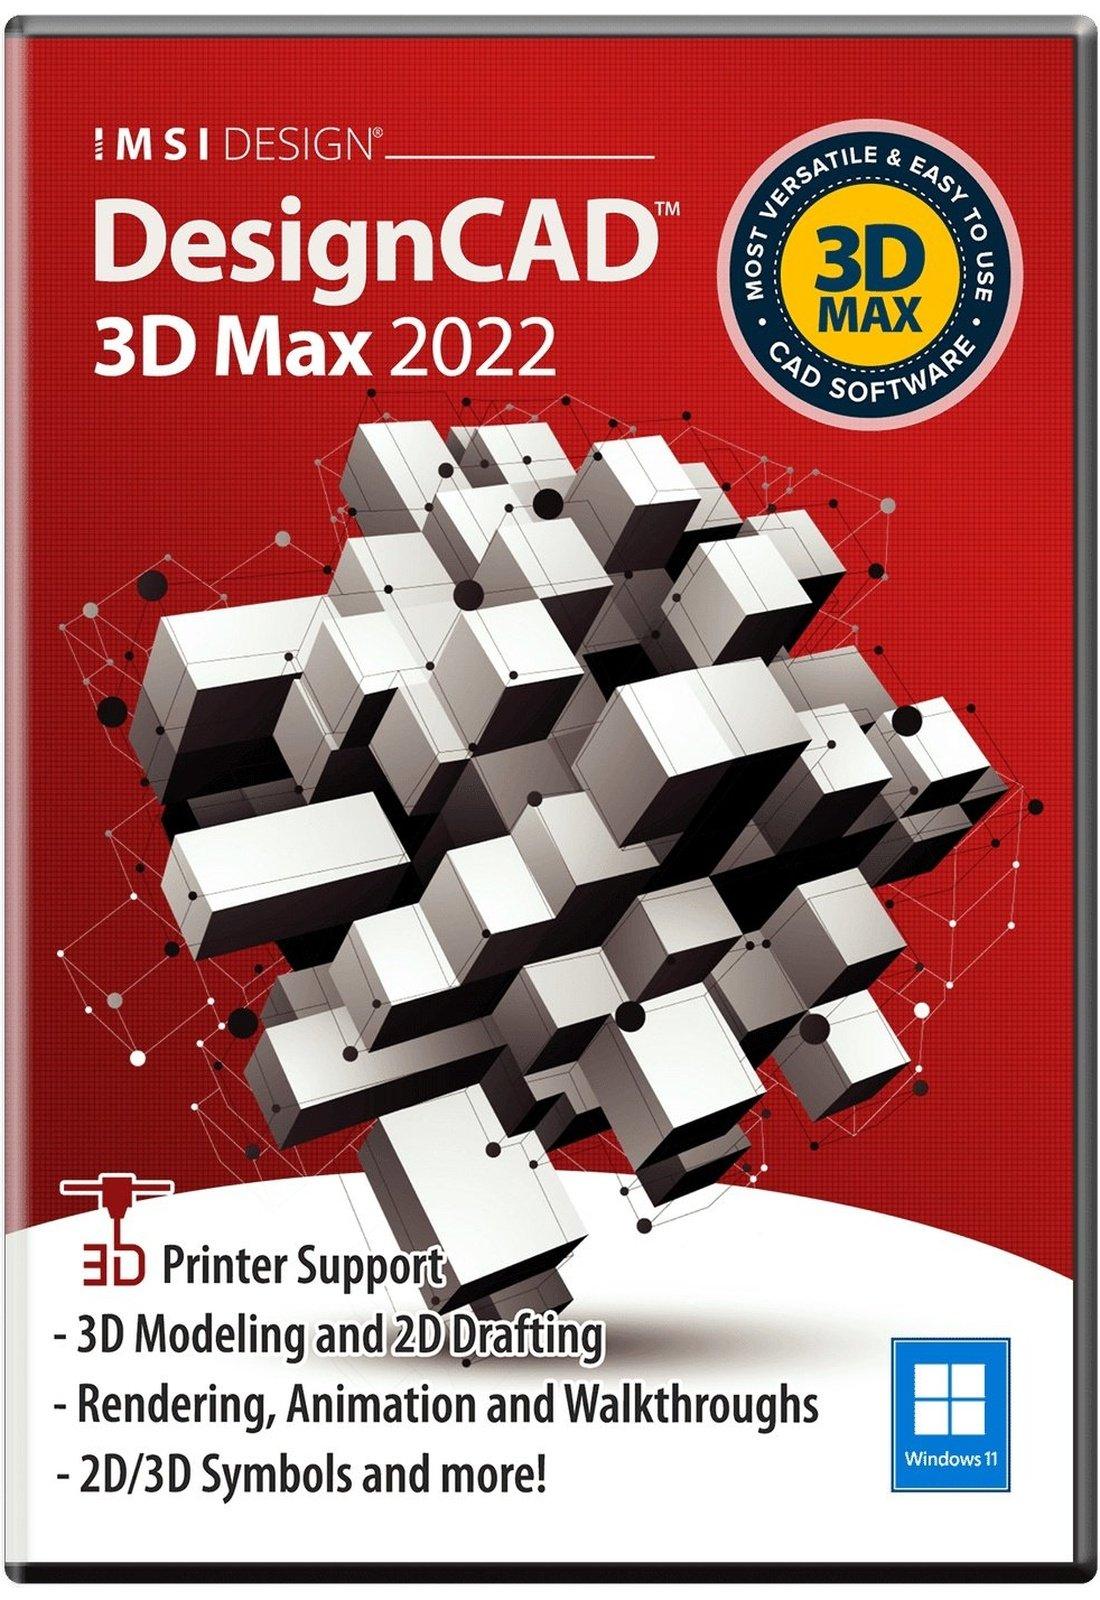 DesignCAD 3D Max 2022 - Instant Download for Windows (1 Computer) - SoftwareCW - Authorized Reseller